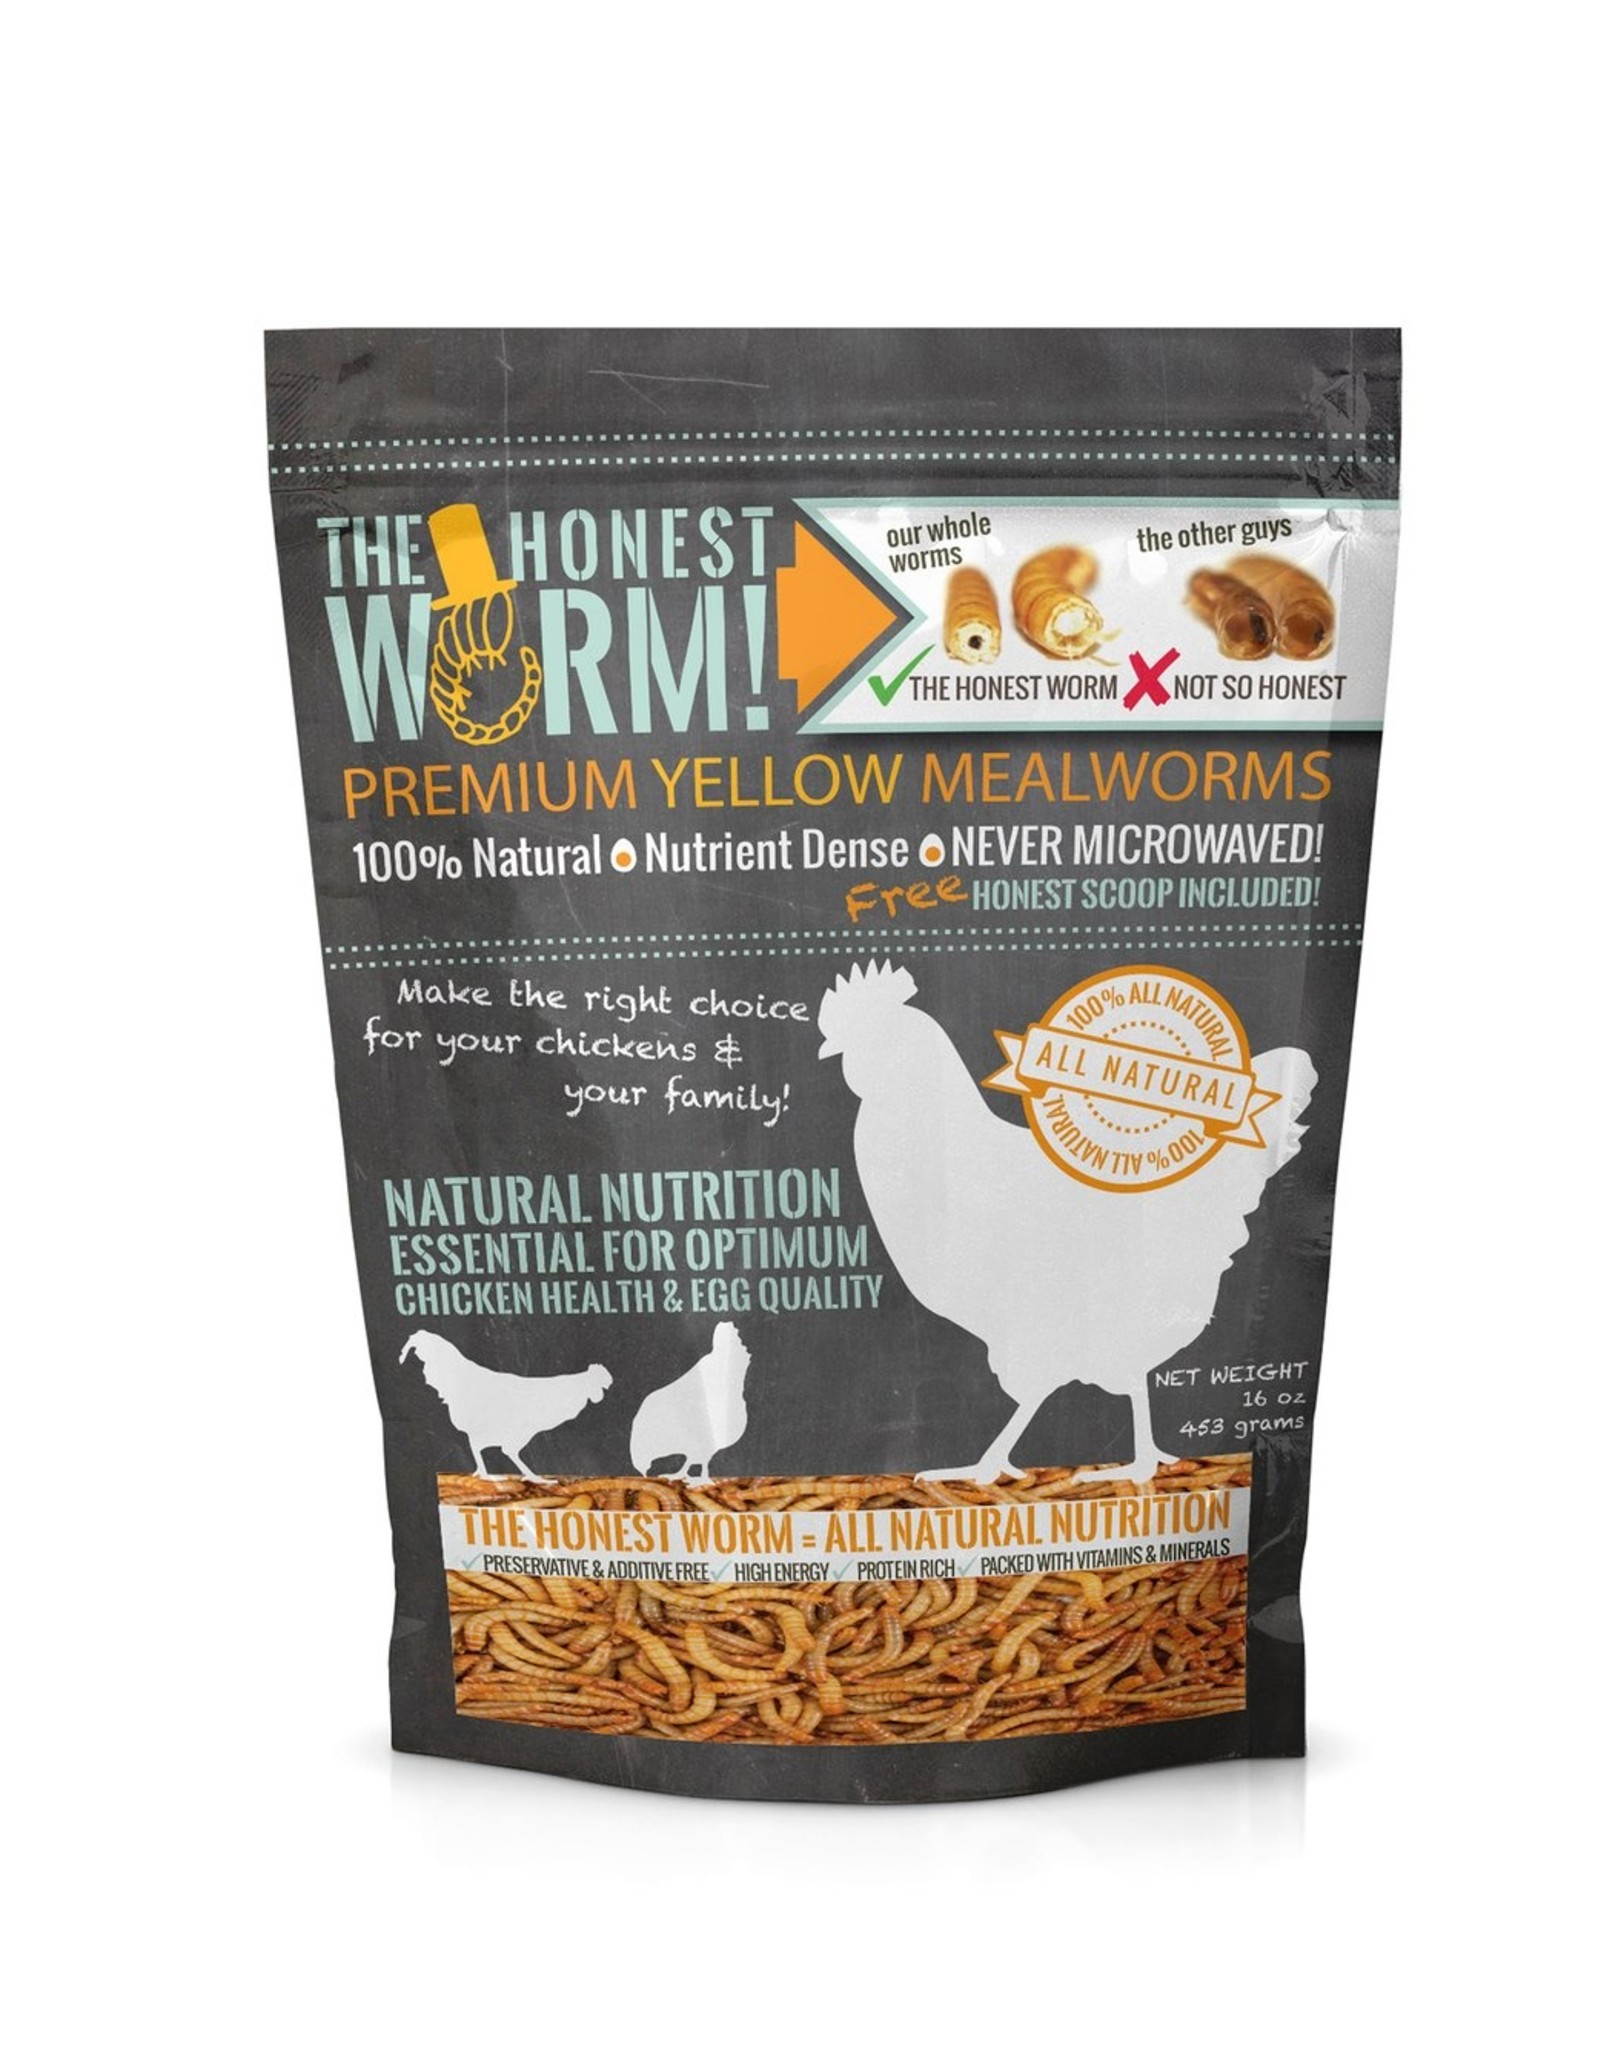 DAVE & MATTS CHICKEN STUFF THE HONEST WORM! FREEZE DRIED MEALWORMS 16OZ